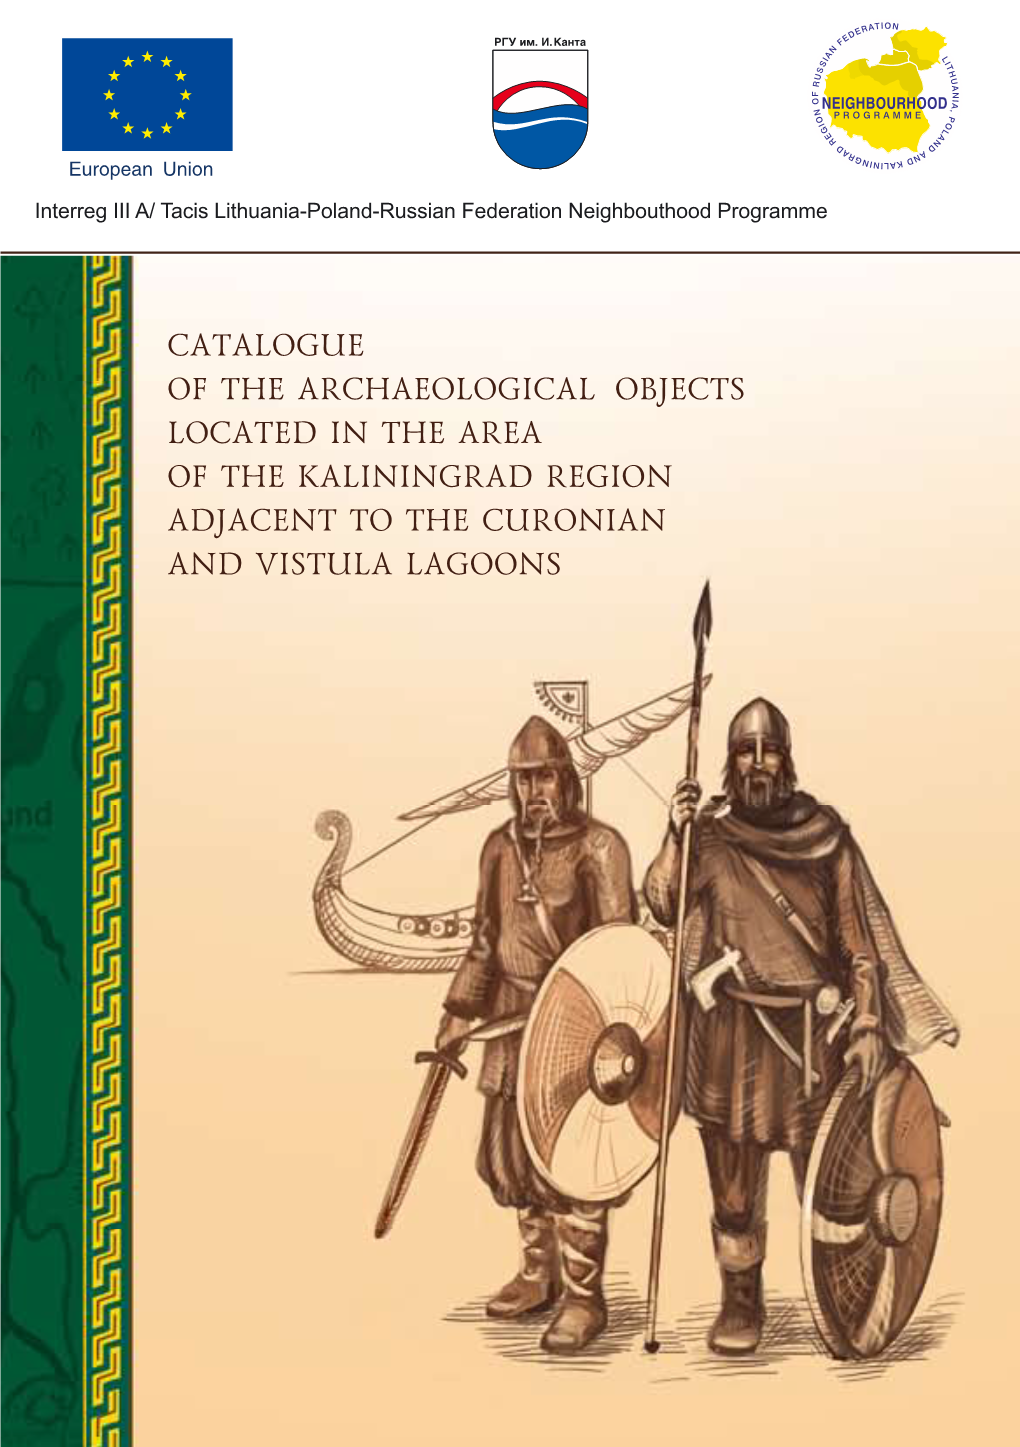 Catalogue of the Archaeological Objects Located in the Area of the Kaliningrad Region Adjacent to the Curonian and Vistula Lagoons